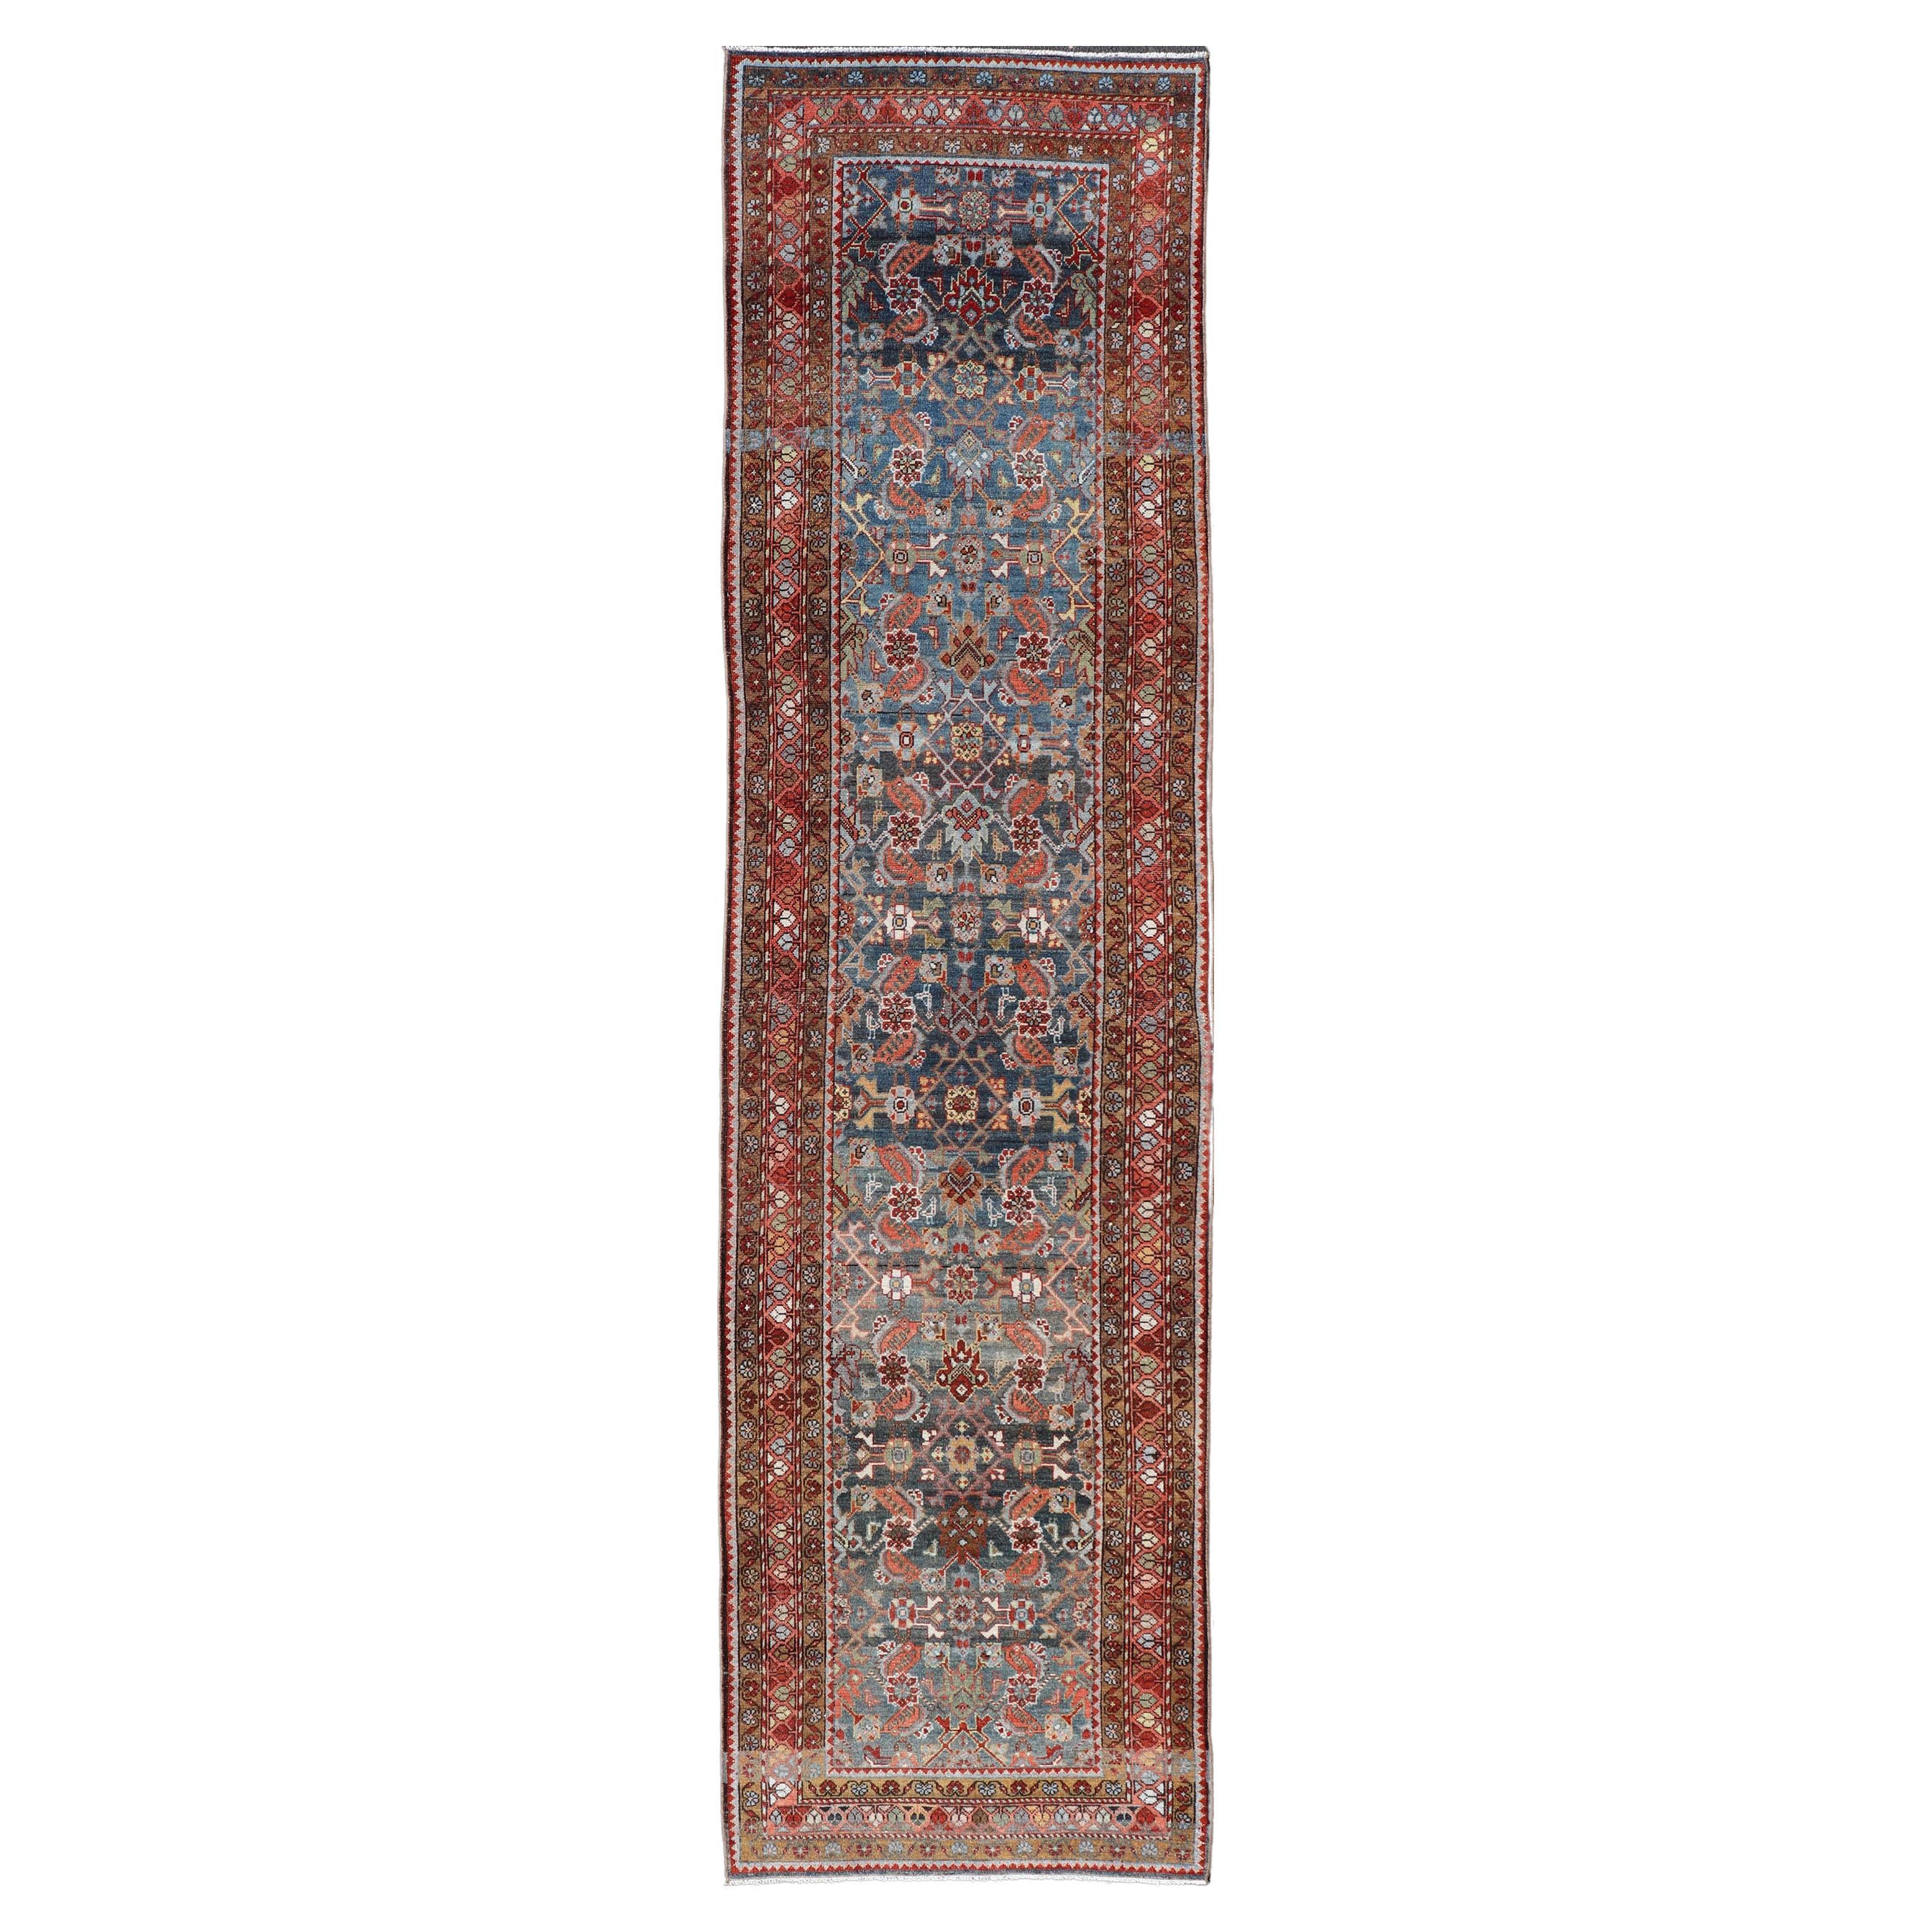 N.W. Persian Antique Runner with Geometric Florals Set on a Blue Field For Sale